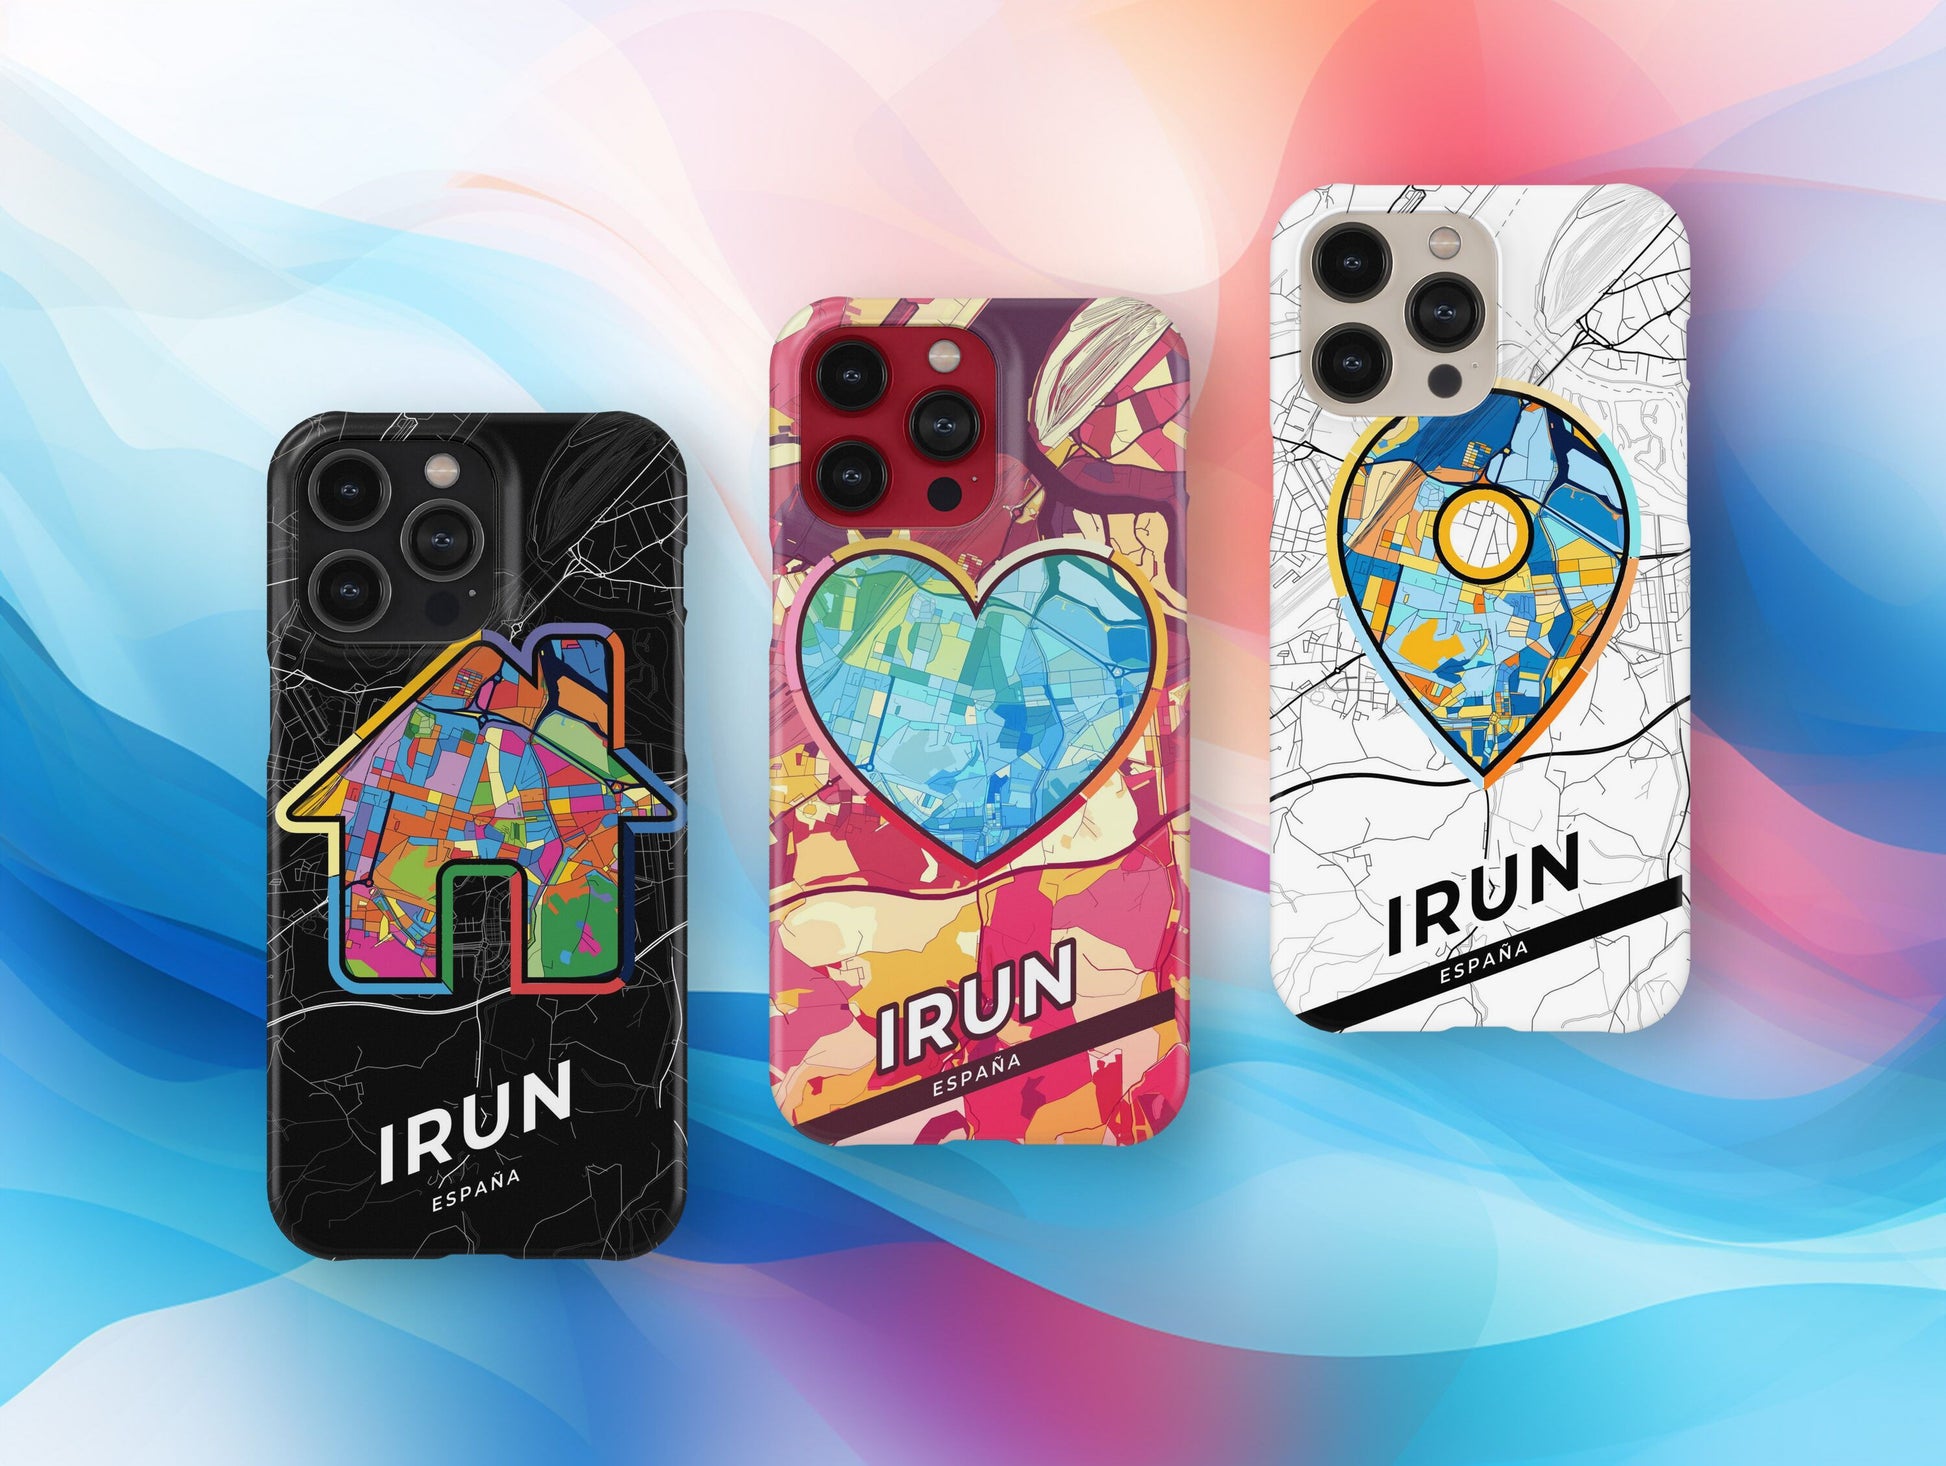 Irun Spain slim phone case with colorful icon. Birthday, wedding or housewarming gift. Couple match cases.